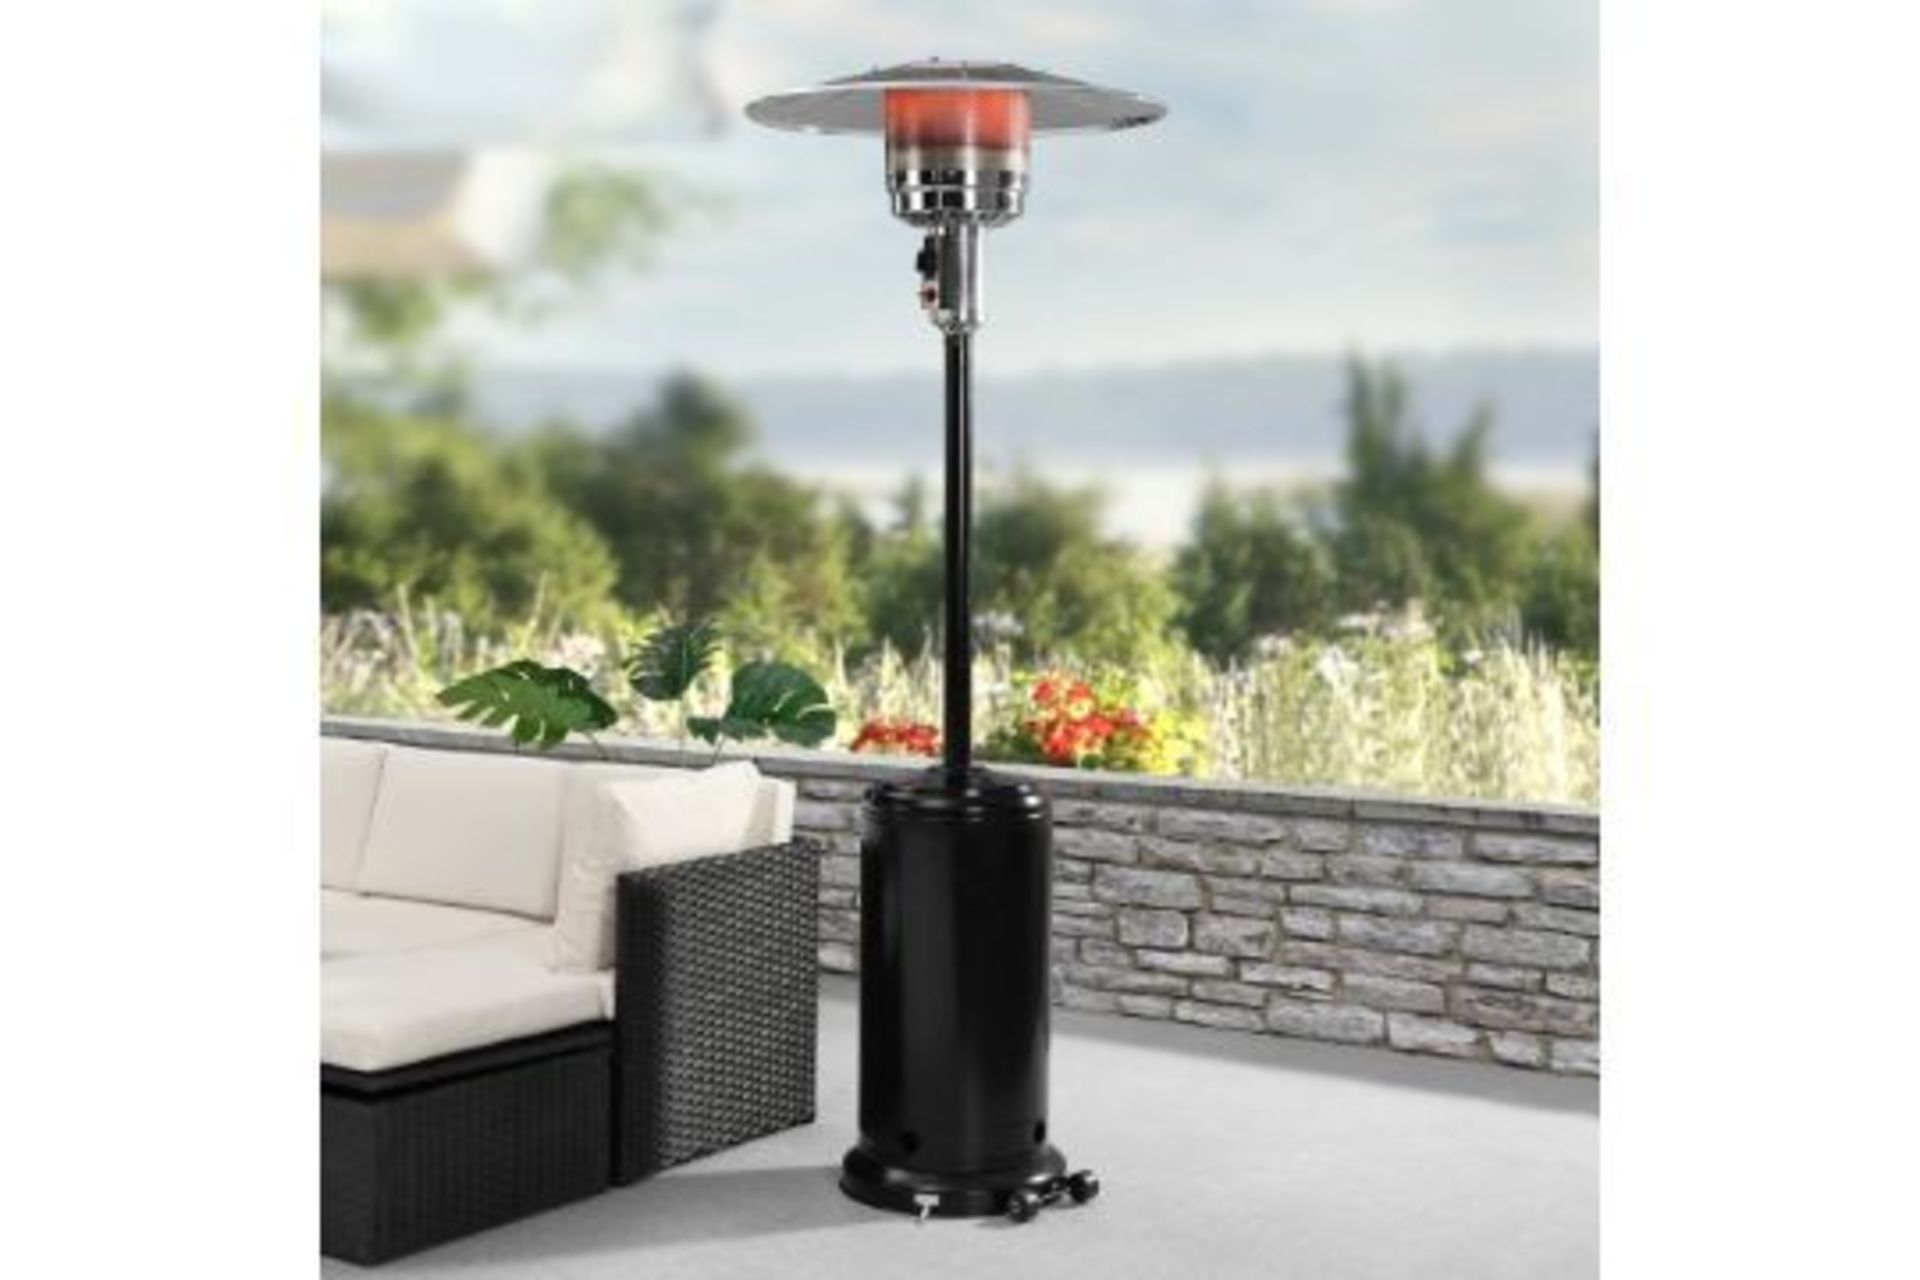 RRP £269 - NEW CHELSEA GARDEN COMPANY 2.2M MUSHROOM HEATER - This futuristic-looking heater adds a